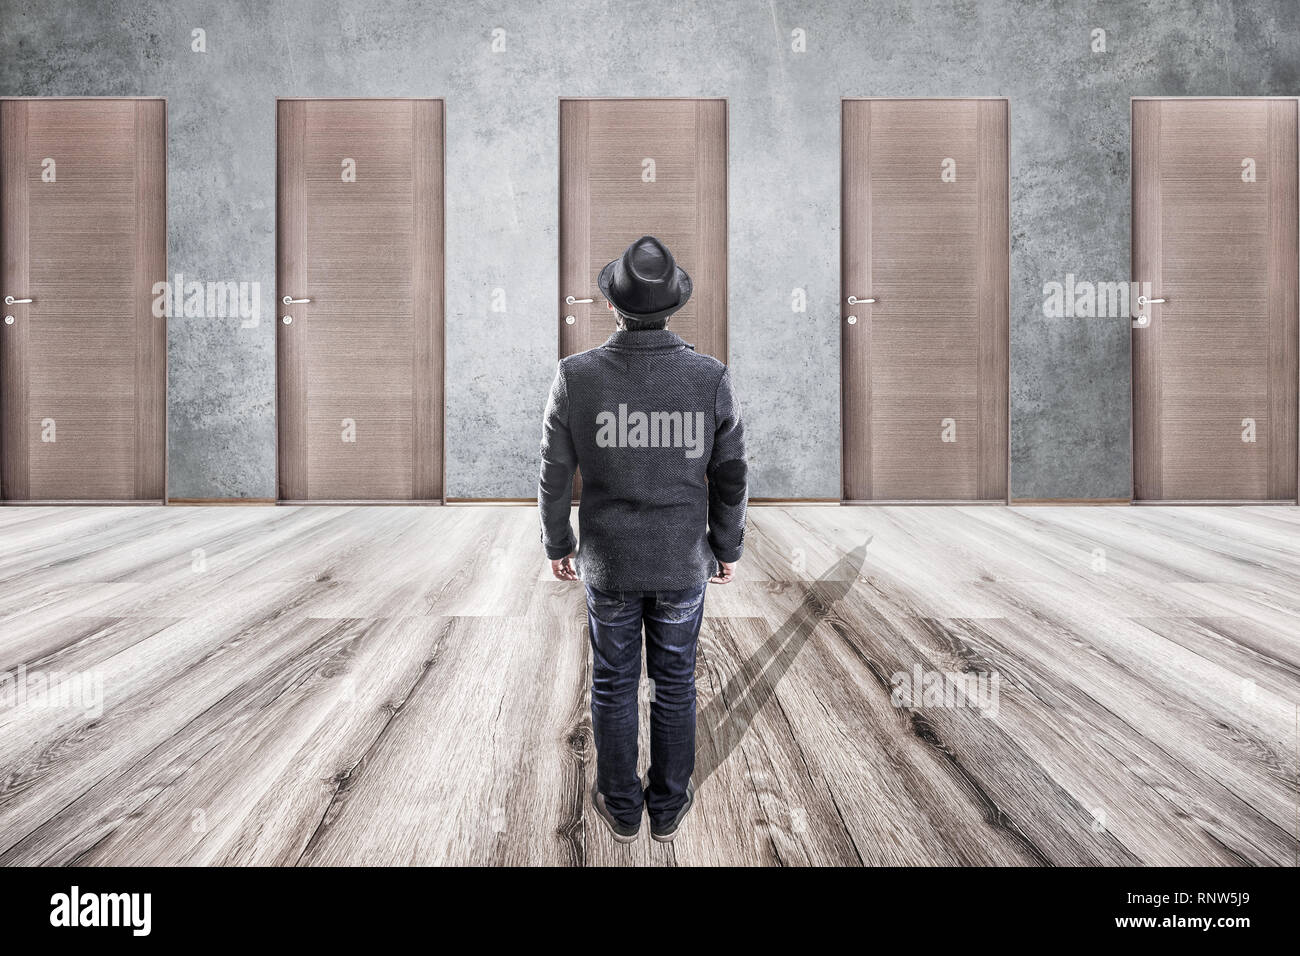 a man in a hat stands in front of wooden doors, the concept of choice and uncertainty behind closed doors Stock Photo